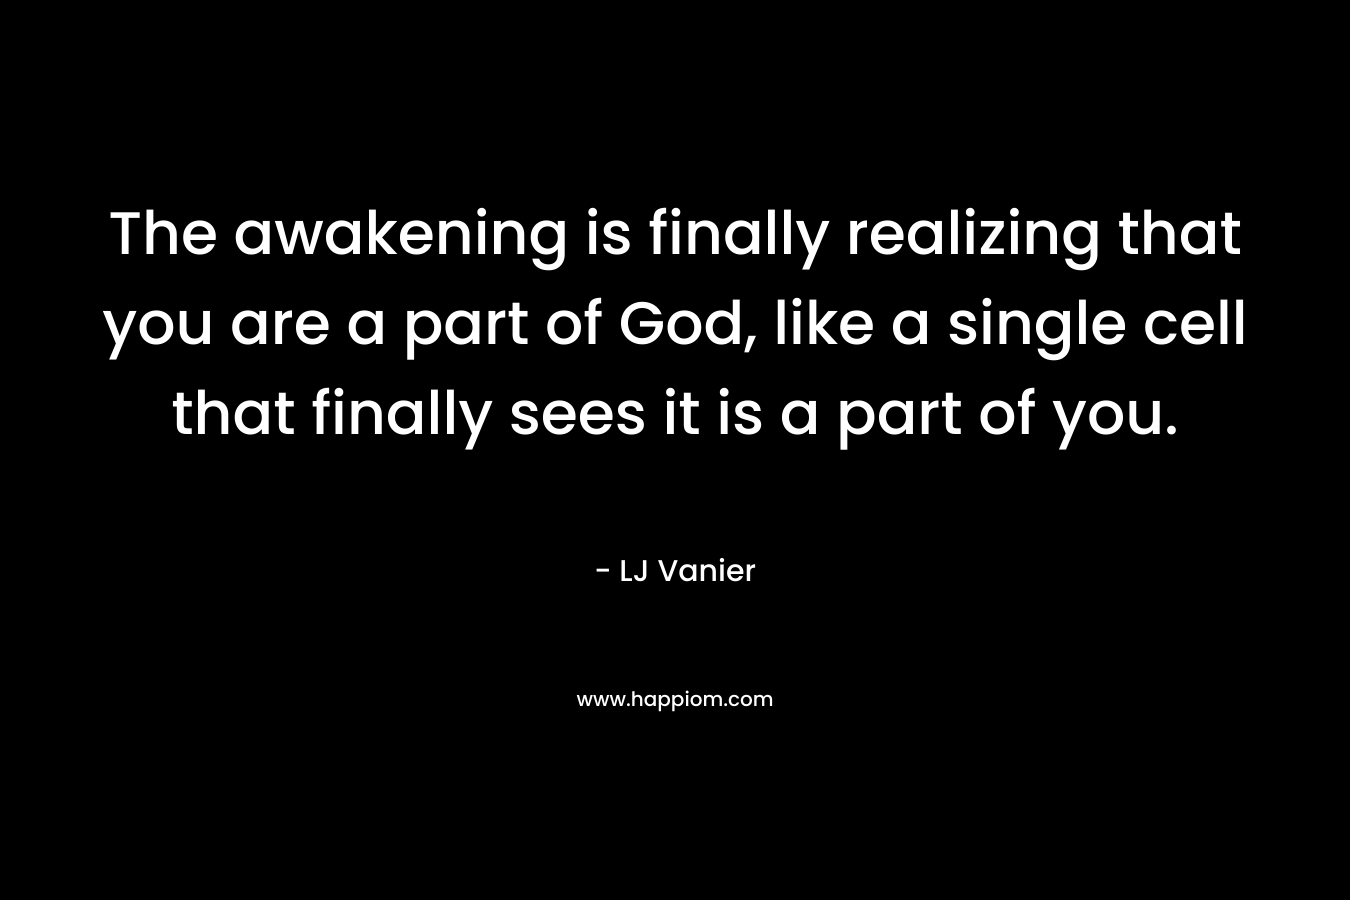 The awakening is finally realizing that you are a part of God, like a single cell that finally sees it is a part of you.